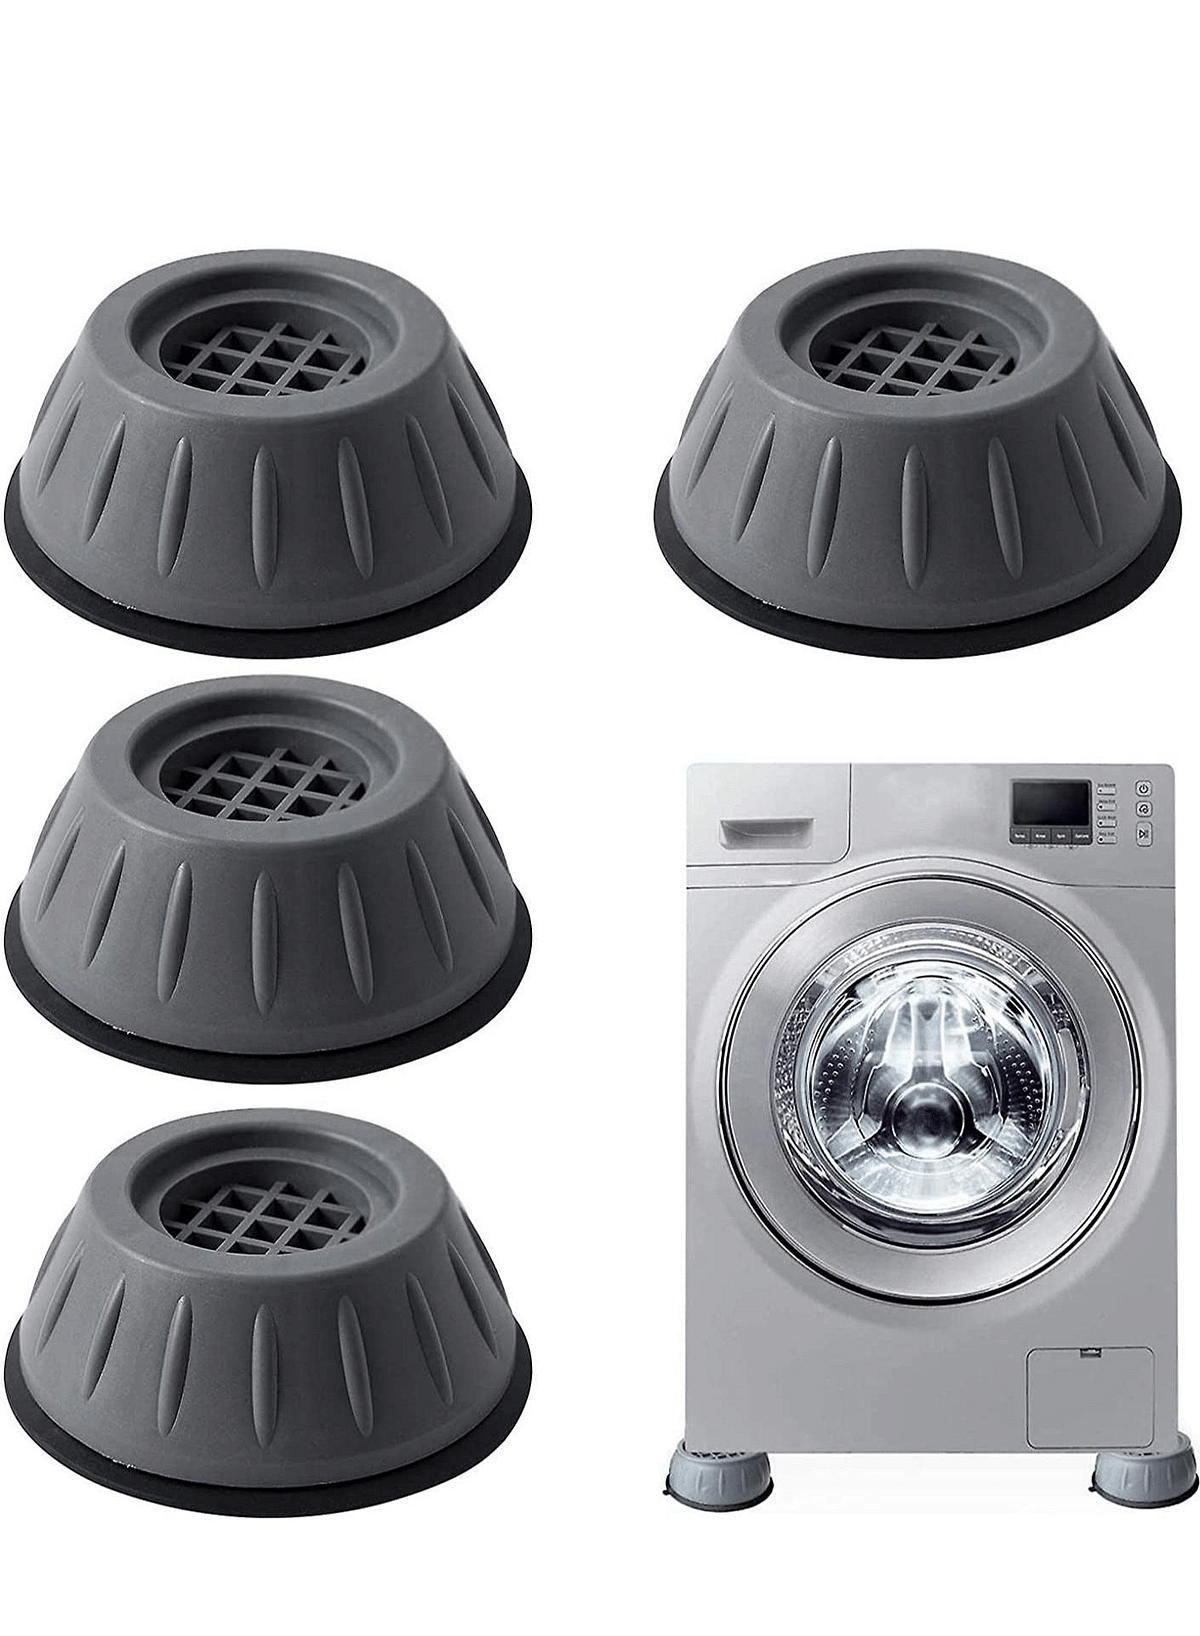 4Pcs Anti Vibration Pads For Washer Dryer Shock And Noise Cancellation, Washing Machine Stand To Prevent Shifting, Shaking Walking For Home, Gray